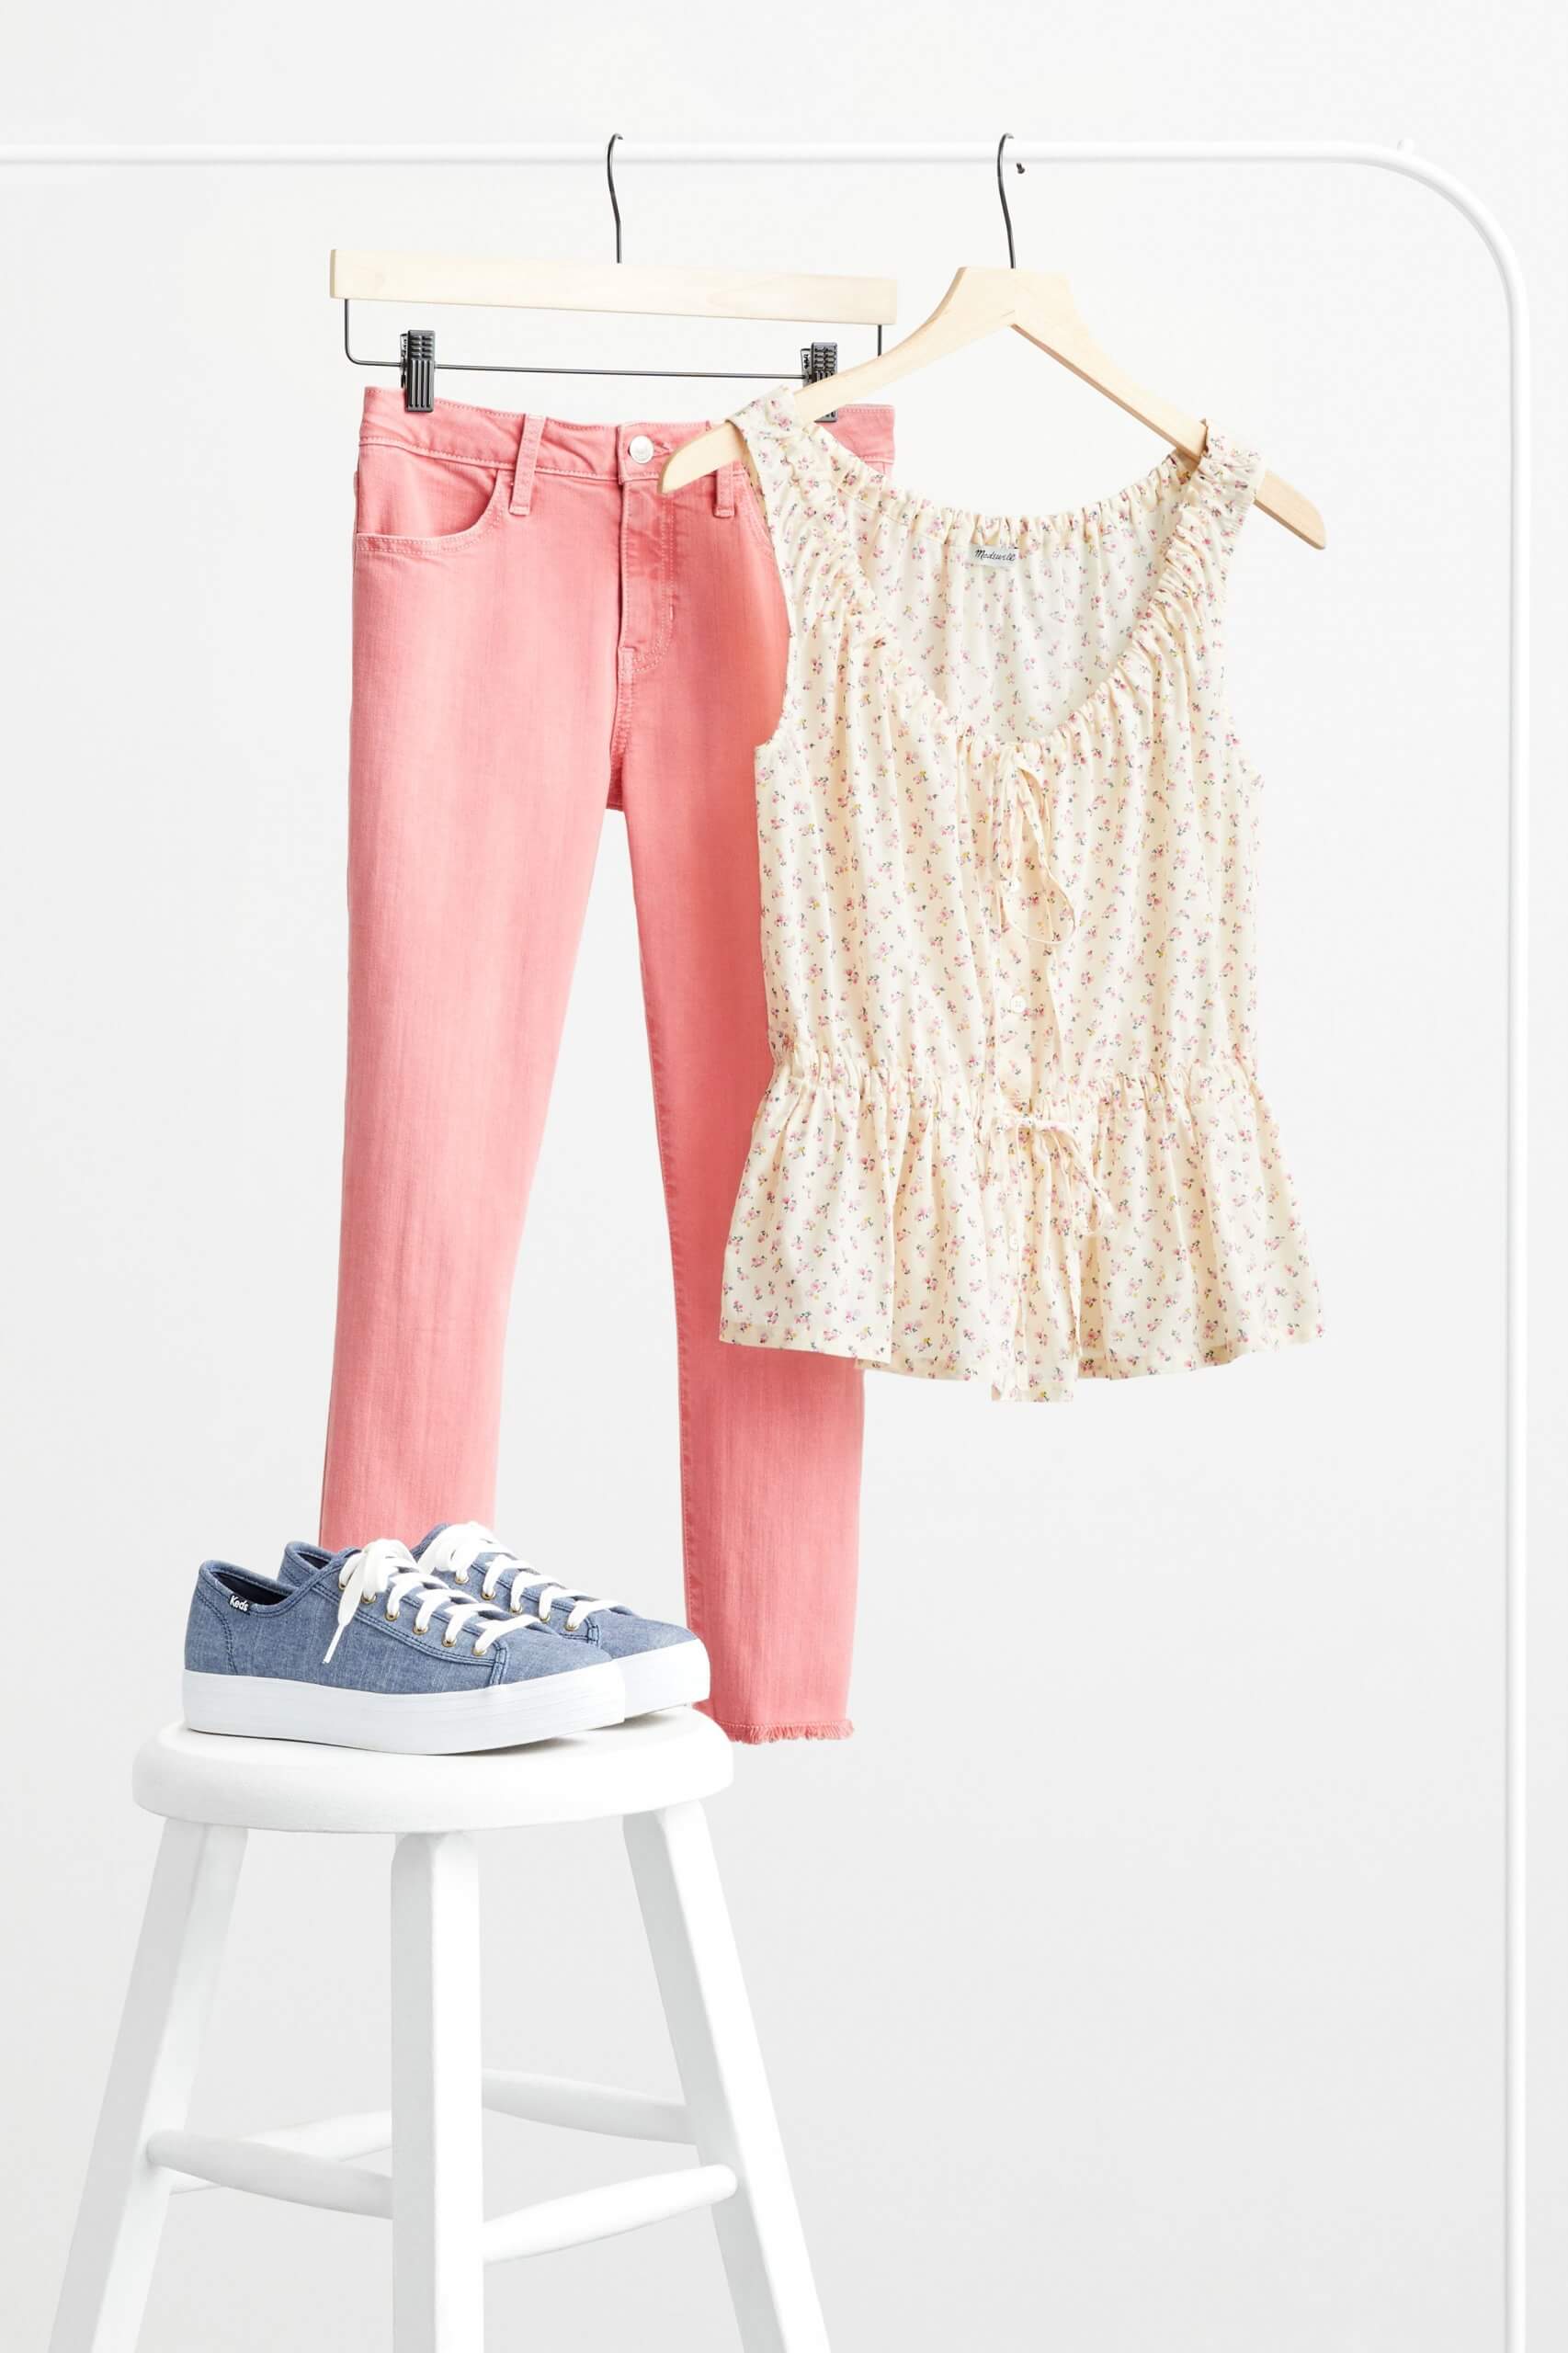 Stitch Fix Women’s pink skinny jeans and yellow-patterned blouse hanging from a rack behind blue sneakers on stool.